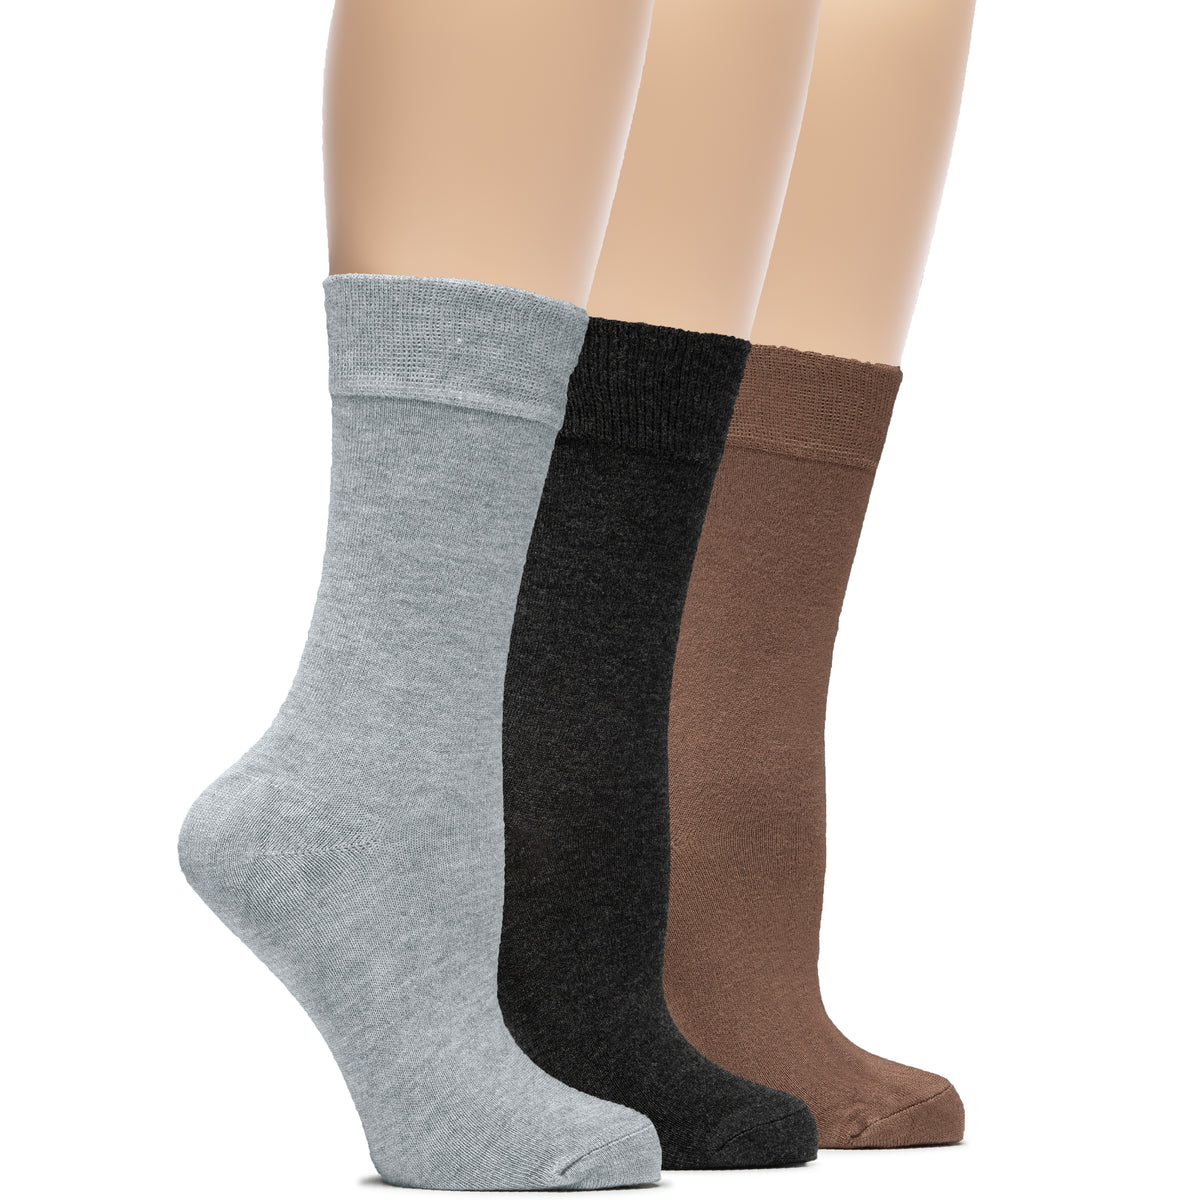 Keep your feet cozy and stylish with these Women's Bamboo Crew Socks. This pack features three socks in different shades, all crafted from eco-friendly bamboo fibers.